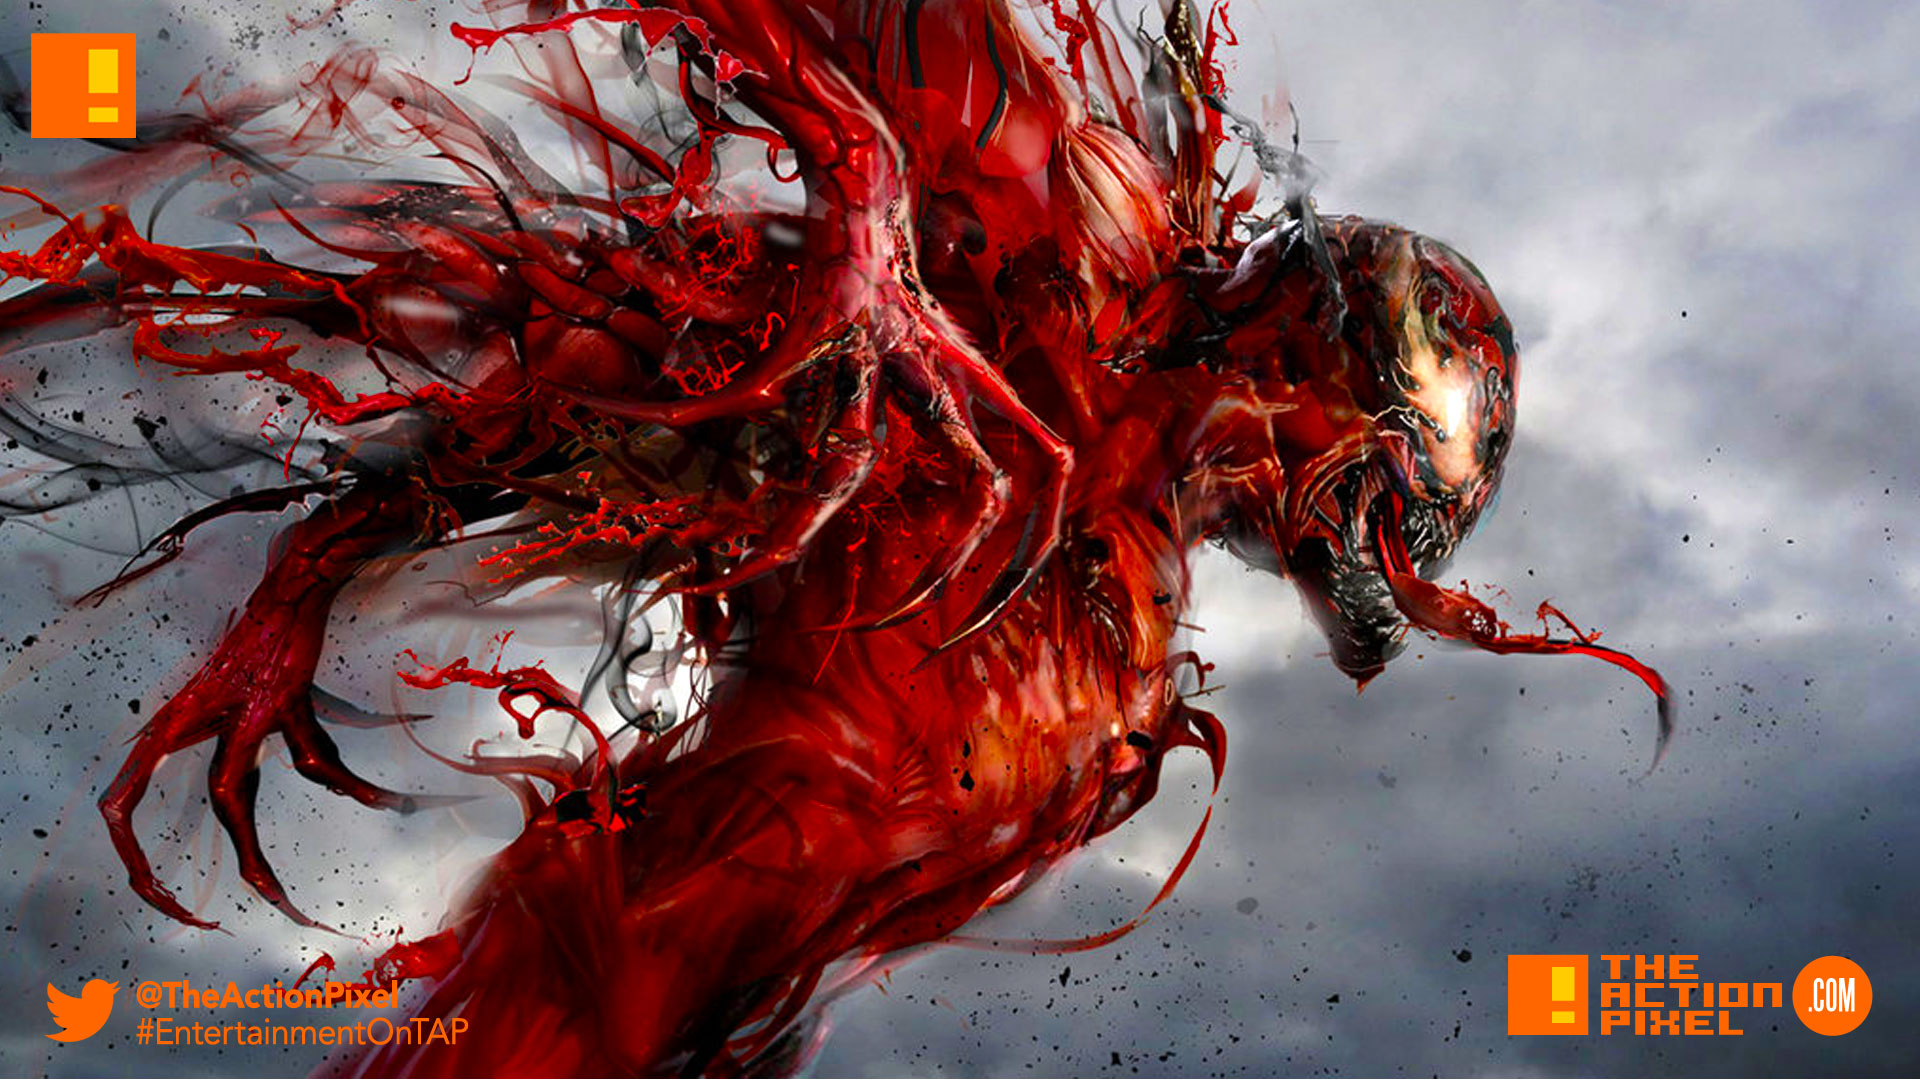 carnage, venom, marvel, marvel comics, sony pictures, sony, the action pixel, entertainment on tap,